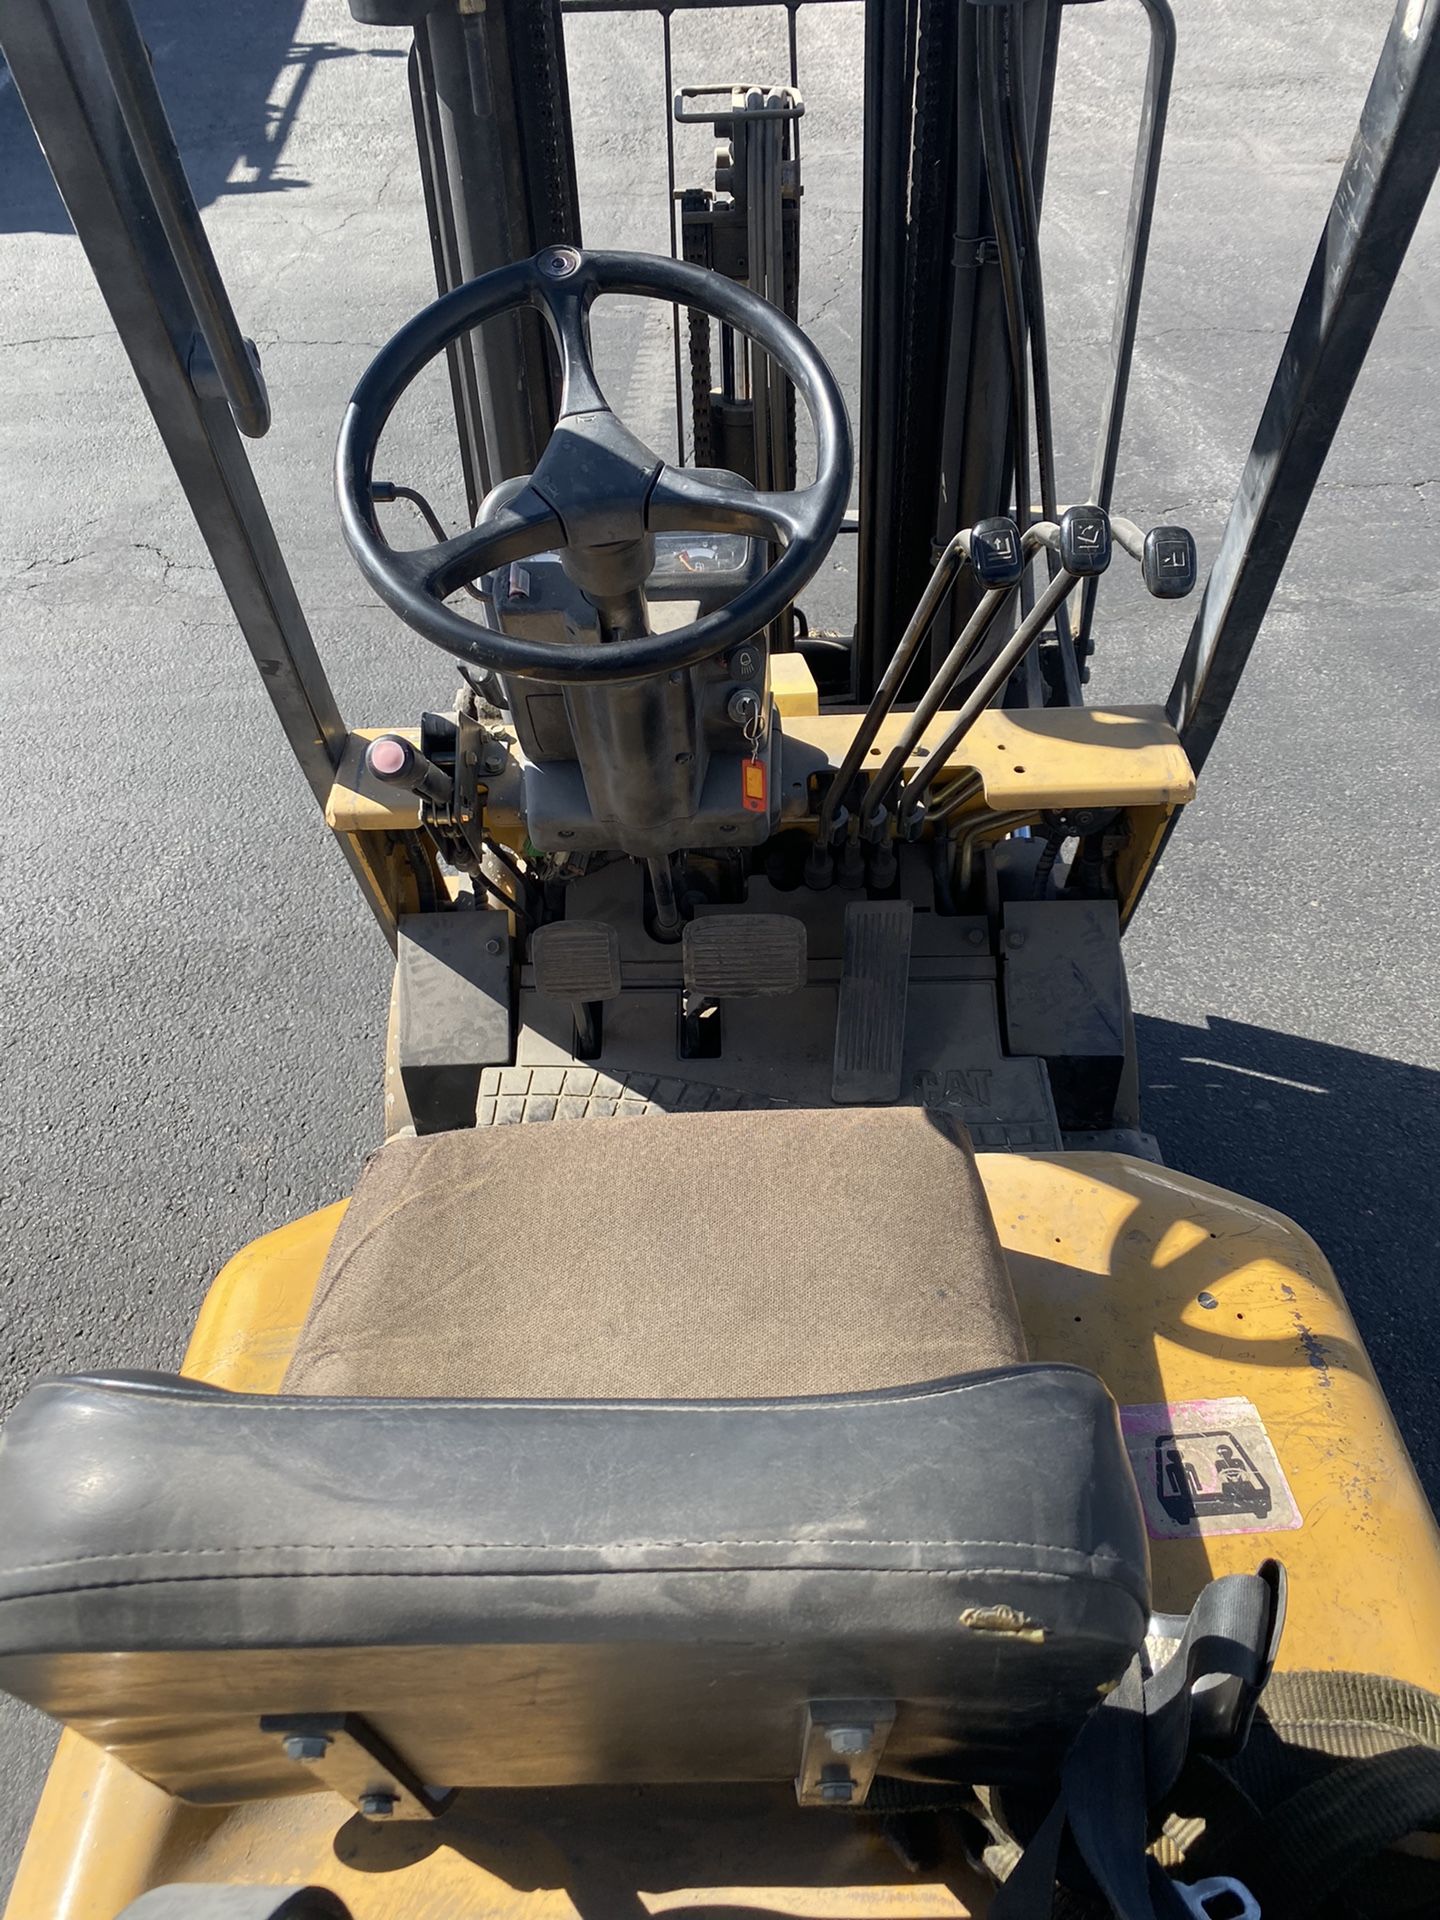 Caterpillar forklift 3000lbs, triple mast, side shift, propane tank not includes